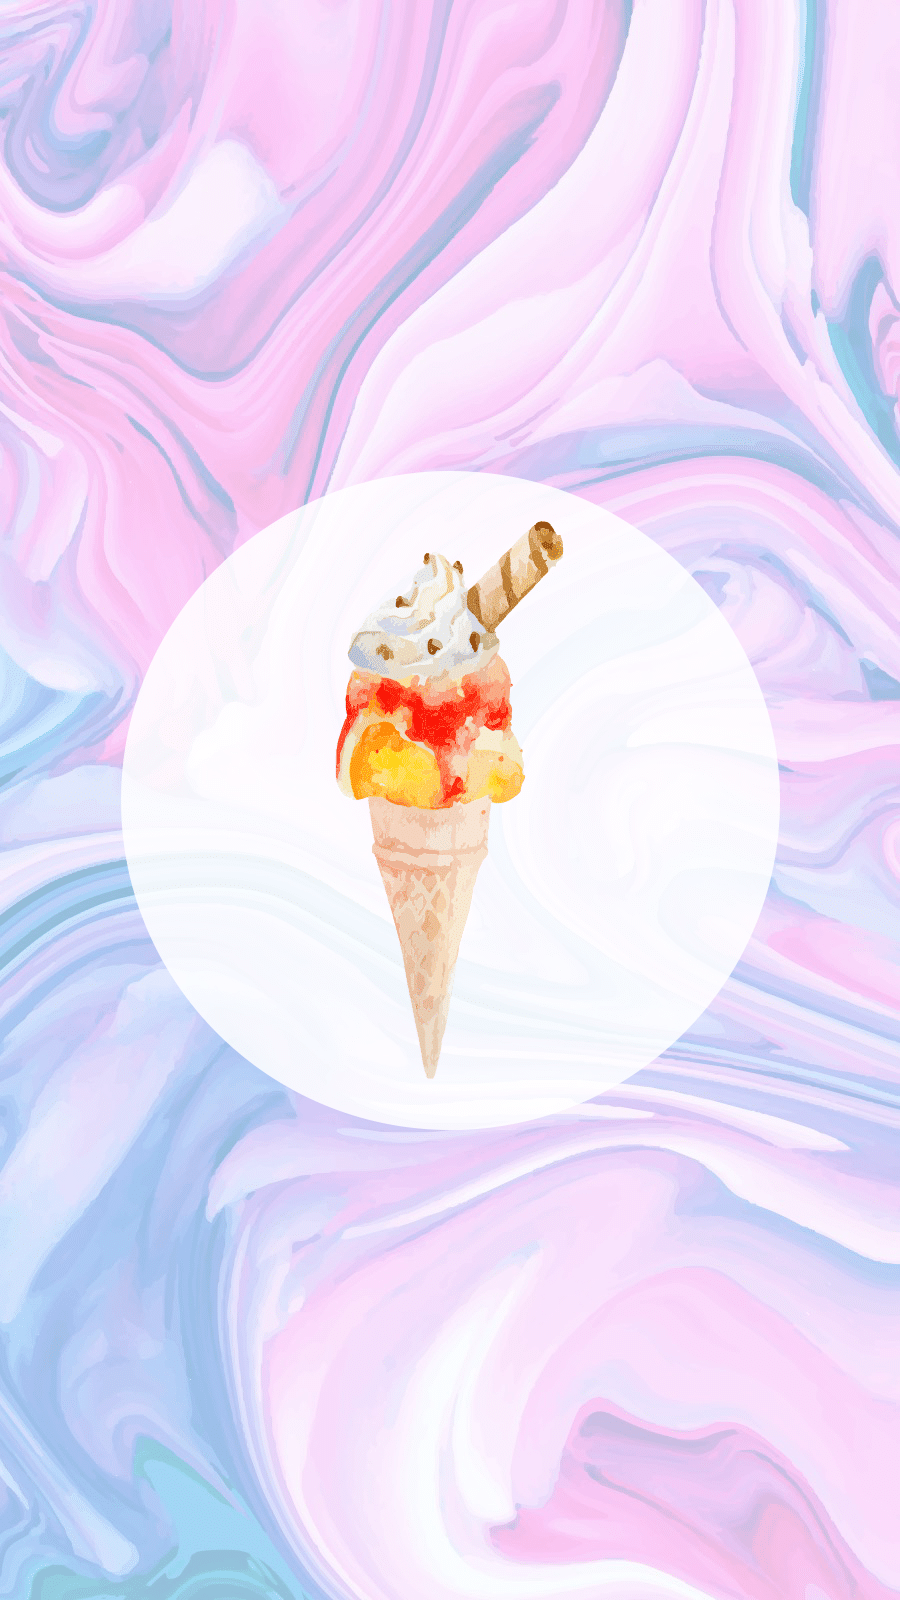 Watercolor Background Delicious Food Ice-cream Simple Fashion Style Instagram Highlight预览效果